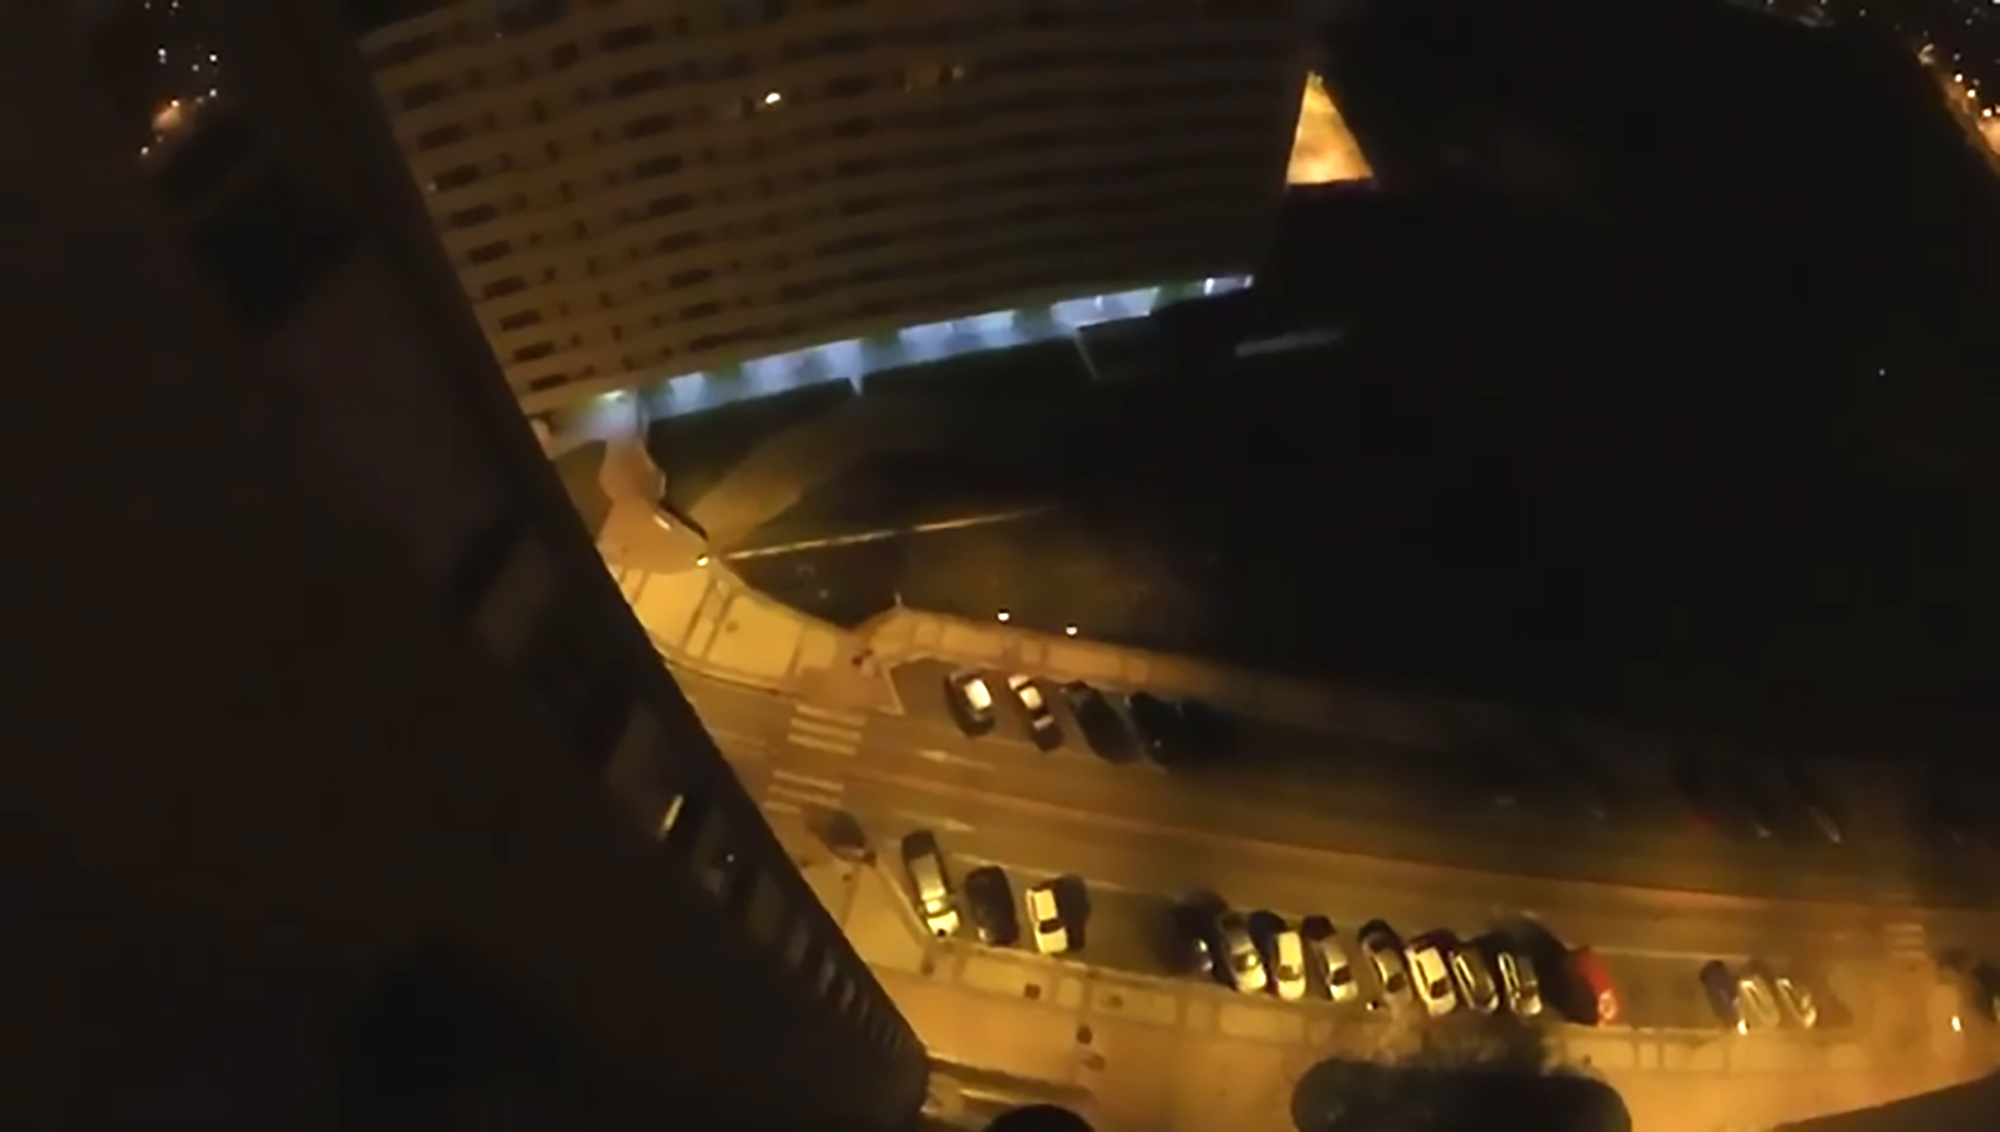 Read more about the article Daredevil BASE Jumper Leaps From City Building At Night